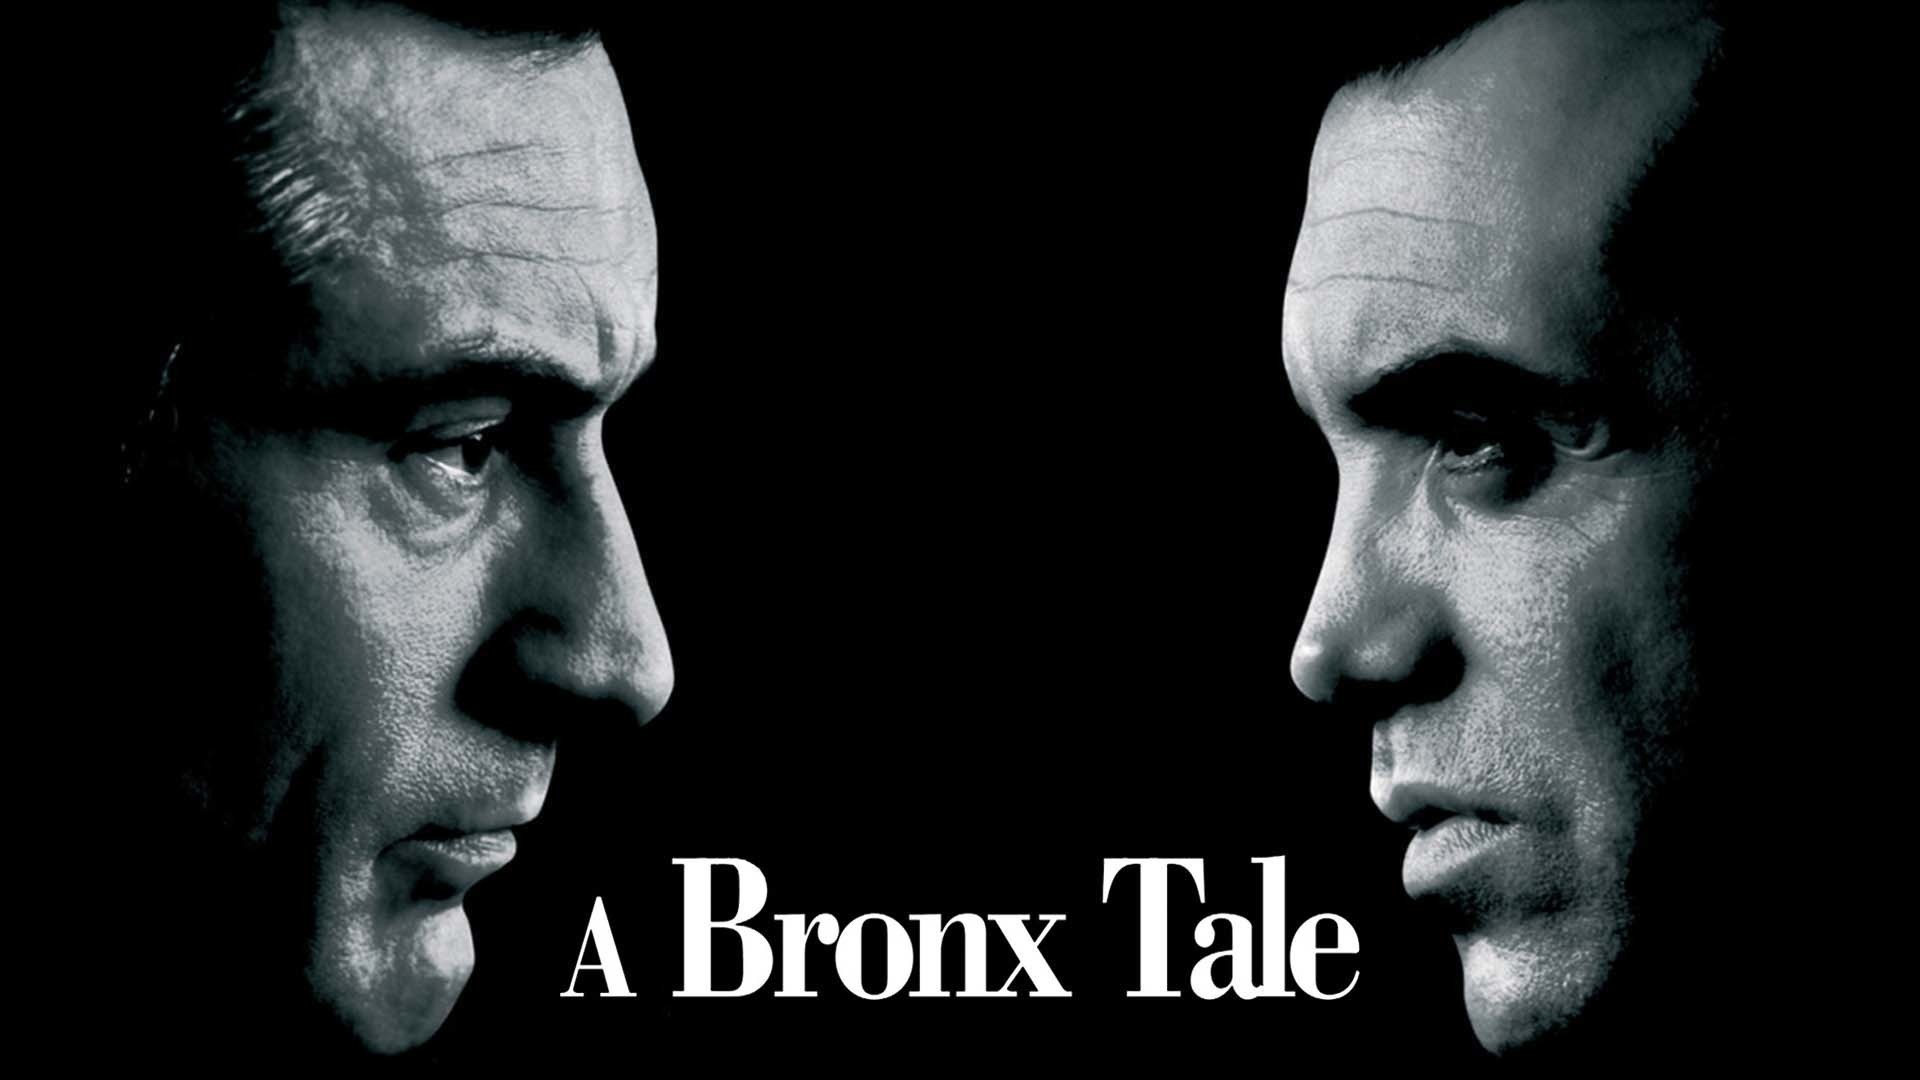 A Bronx Tale wallpapers, Eye-catching designs, Background visuals, Home screen, 1920x1080 Full HD Desktop